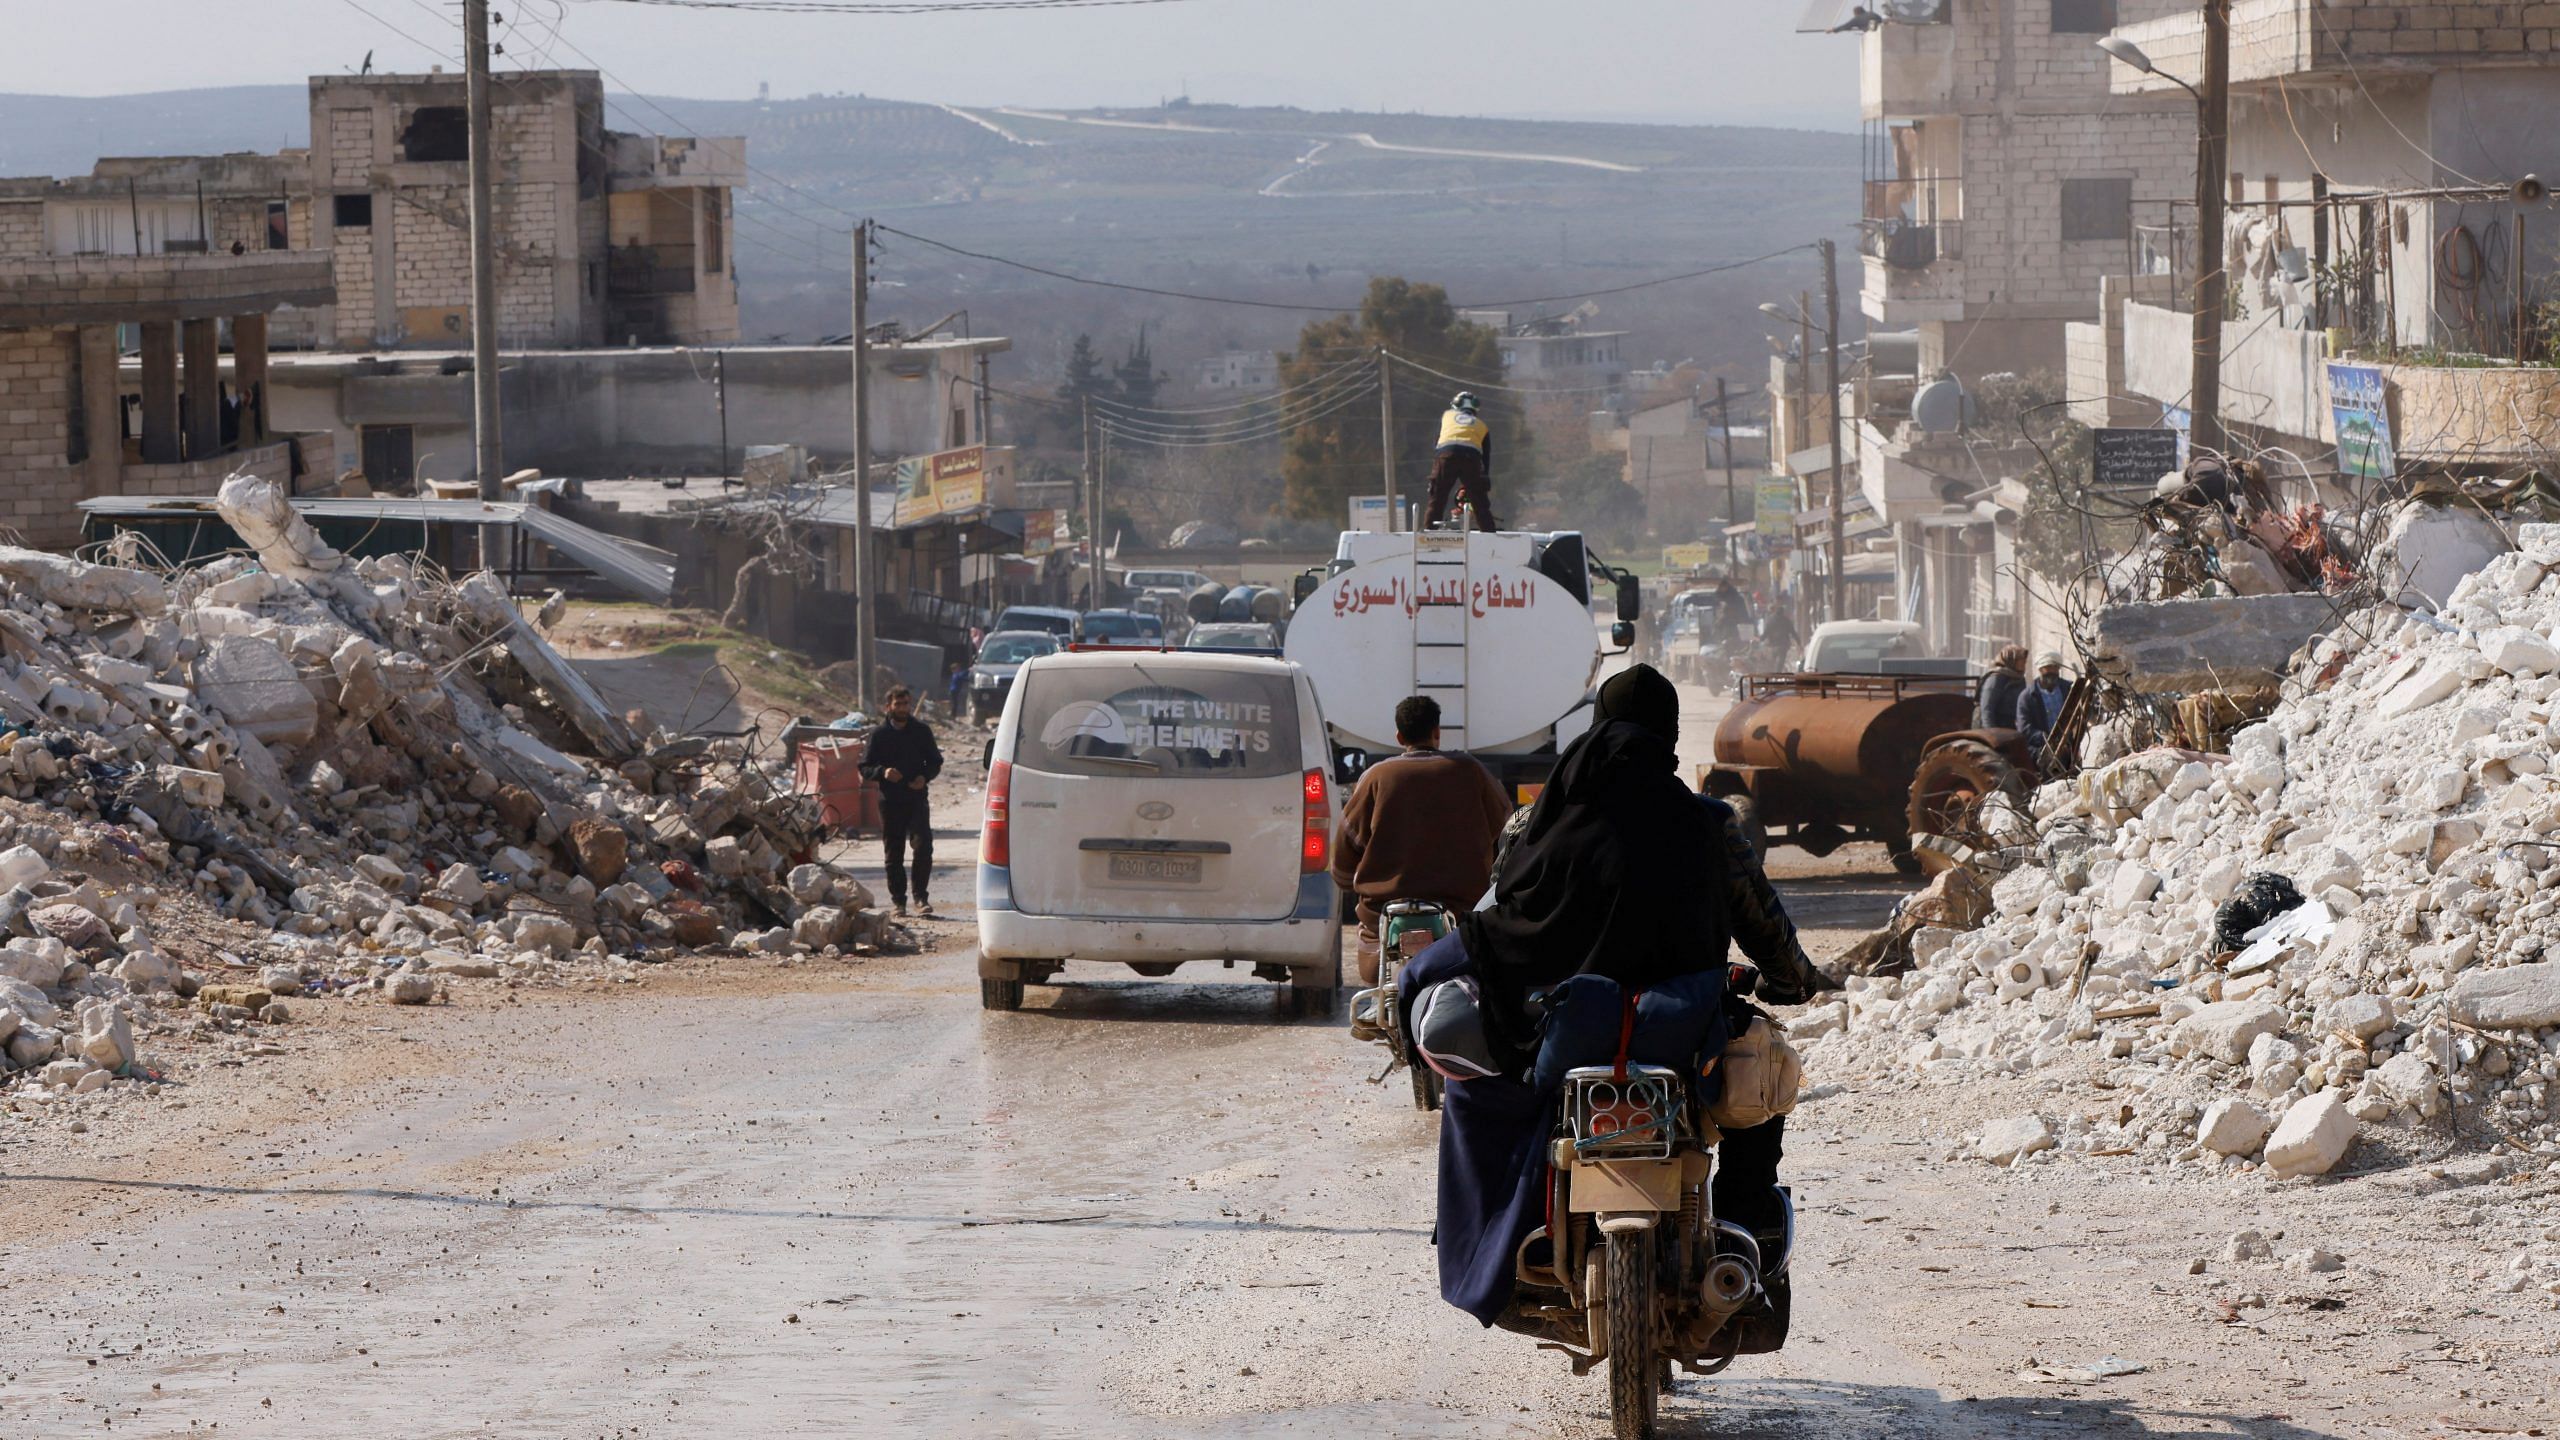 People drive through a demolished street in the aftermath of an earthquake in the rebel-held town of Harem, in Idlib governorate, Syria on 14 February 2023 | Photo: Reuteus